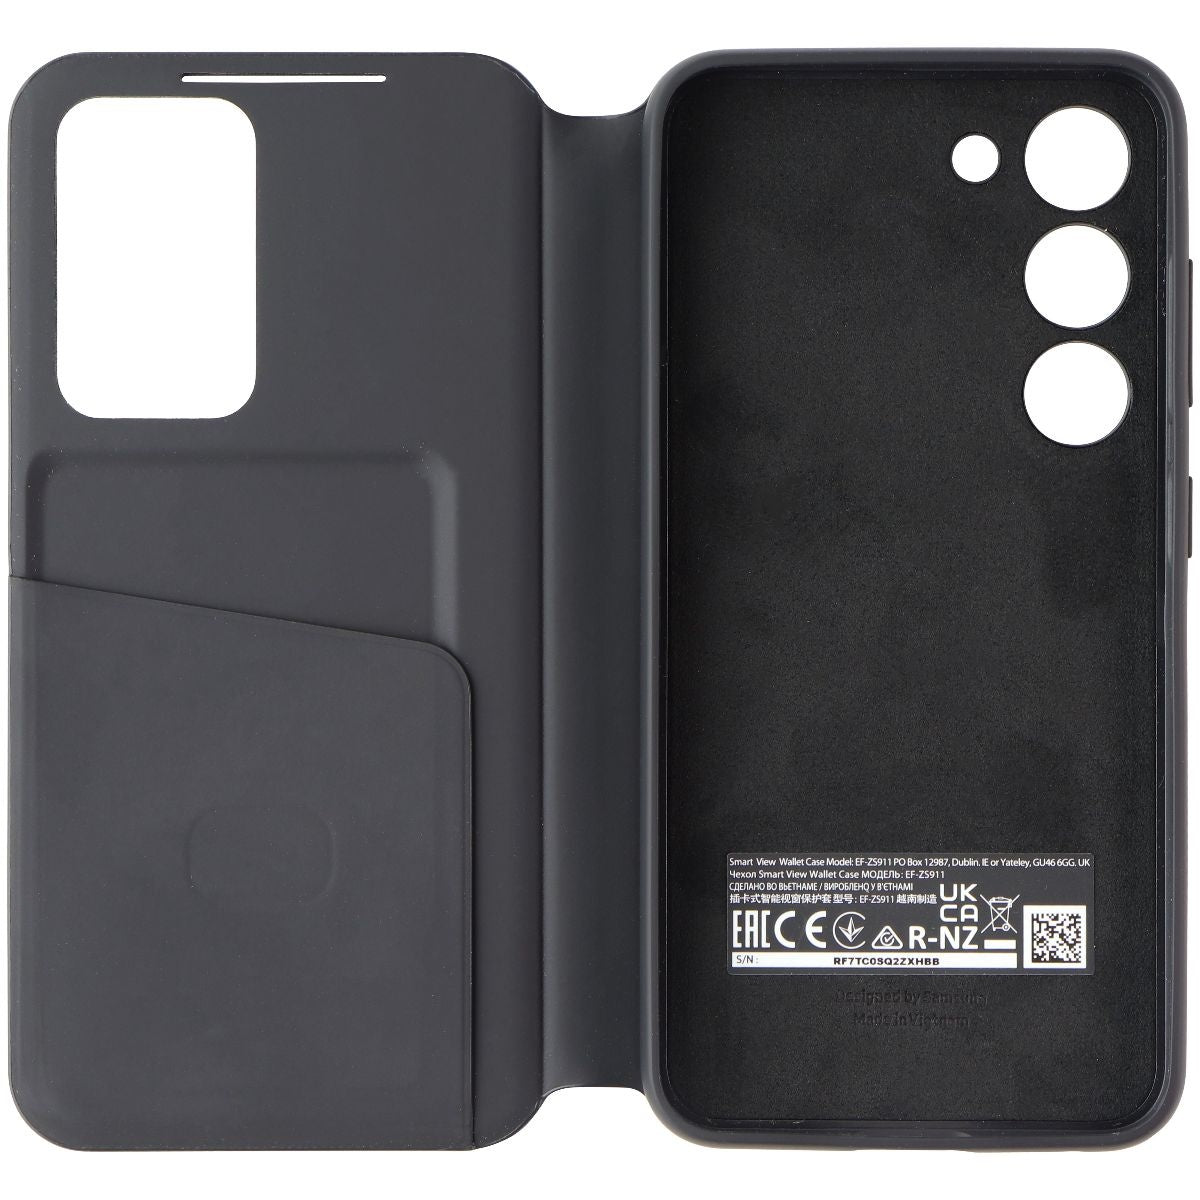 Samsung S-View Wallet Case for Samsung Galaxy S23 - Black (EF-ZS911CBE) Cell Phone - Cases, Covers & Skins Samsung    - Simple Cell Bulk Wholesale Pricing - USA Seller